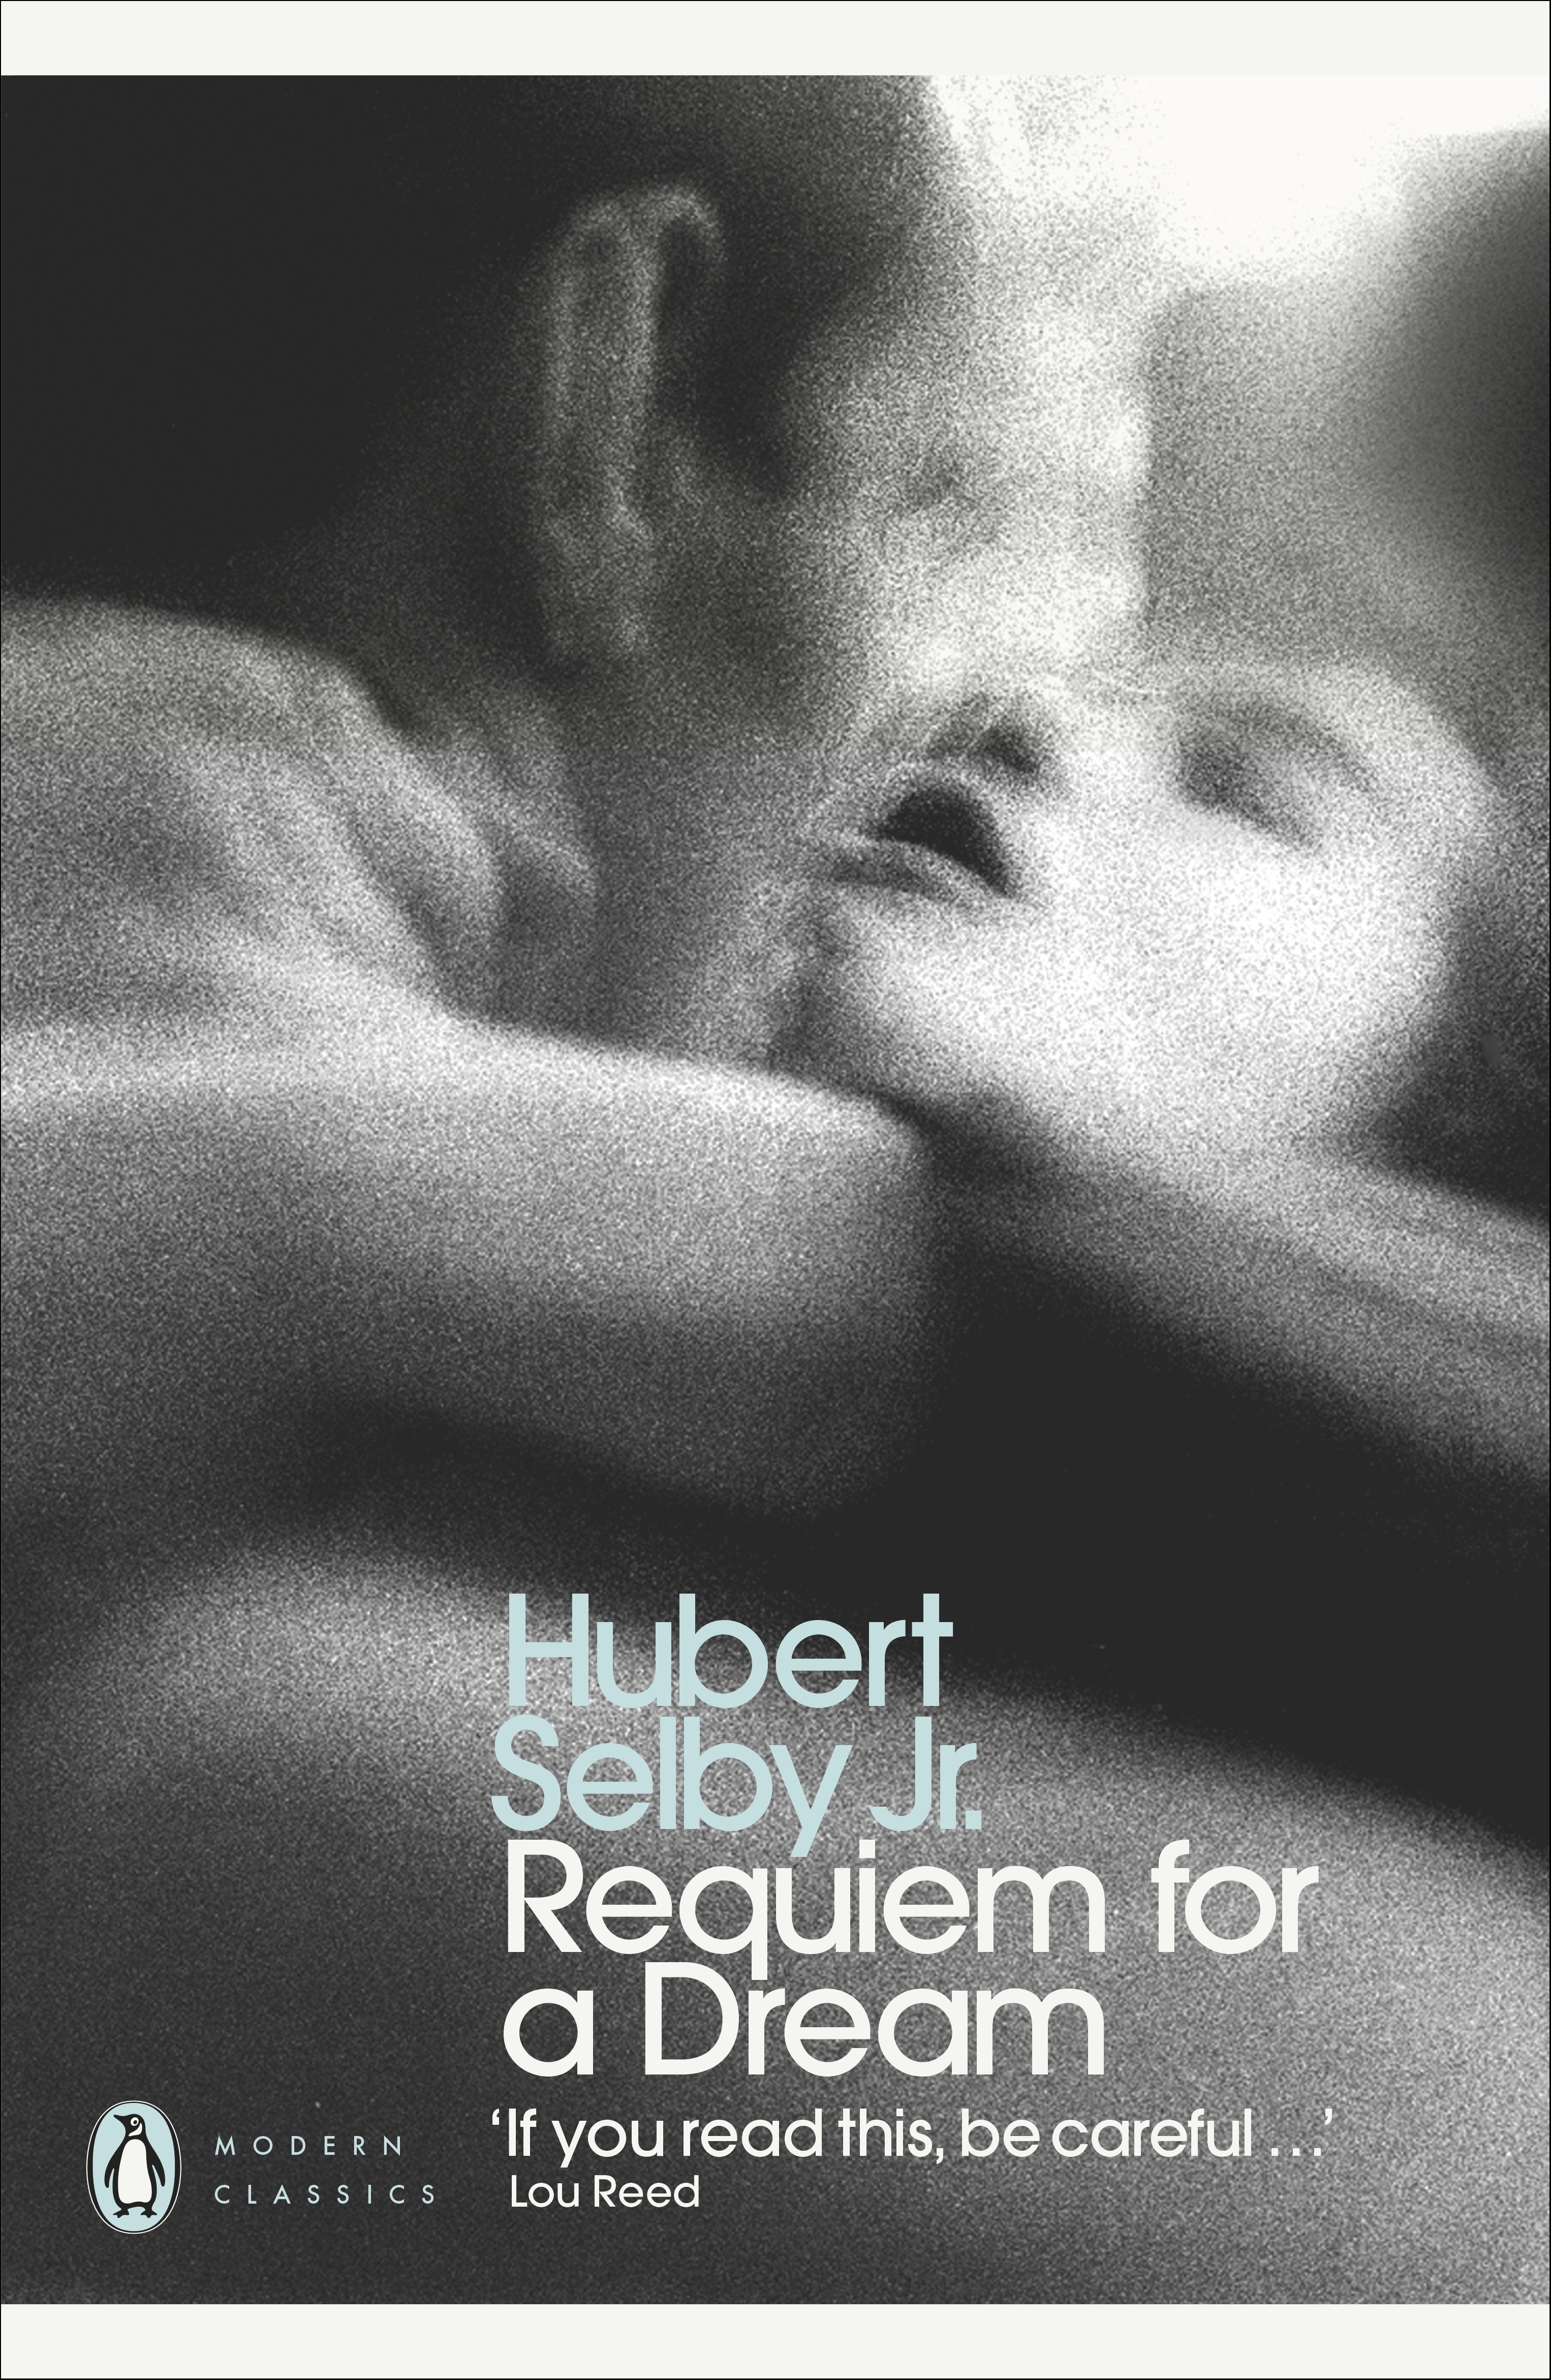 Book “Requiem for a Dream” by Hubert Selby Jr. — April 26, 2012